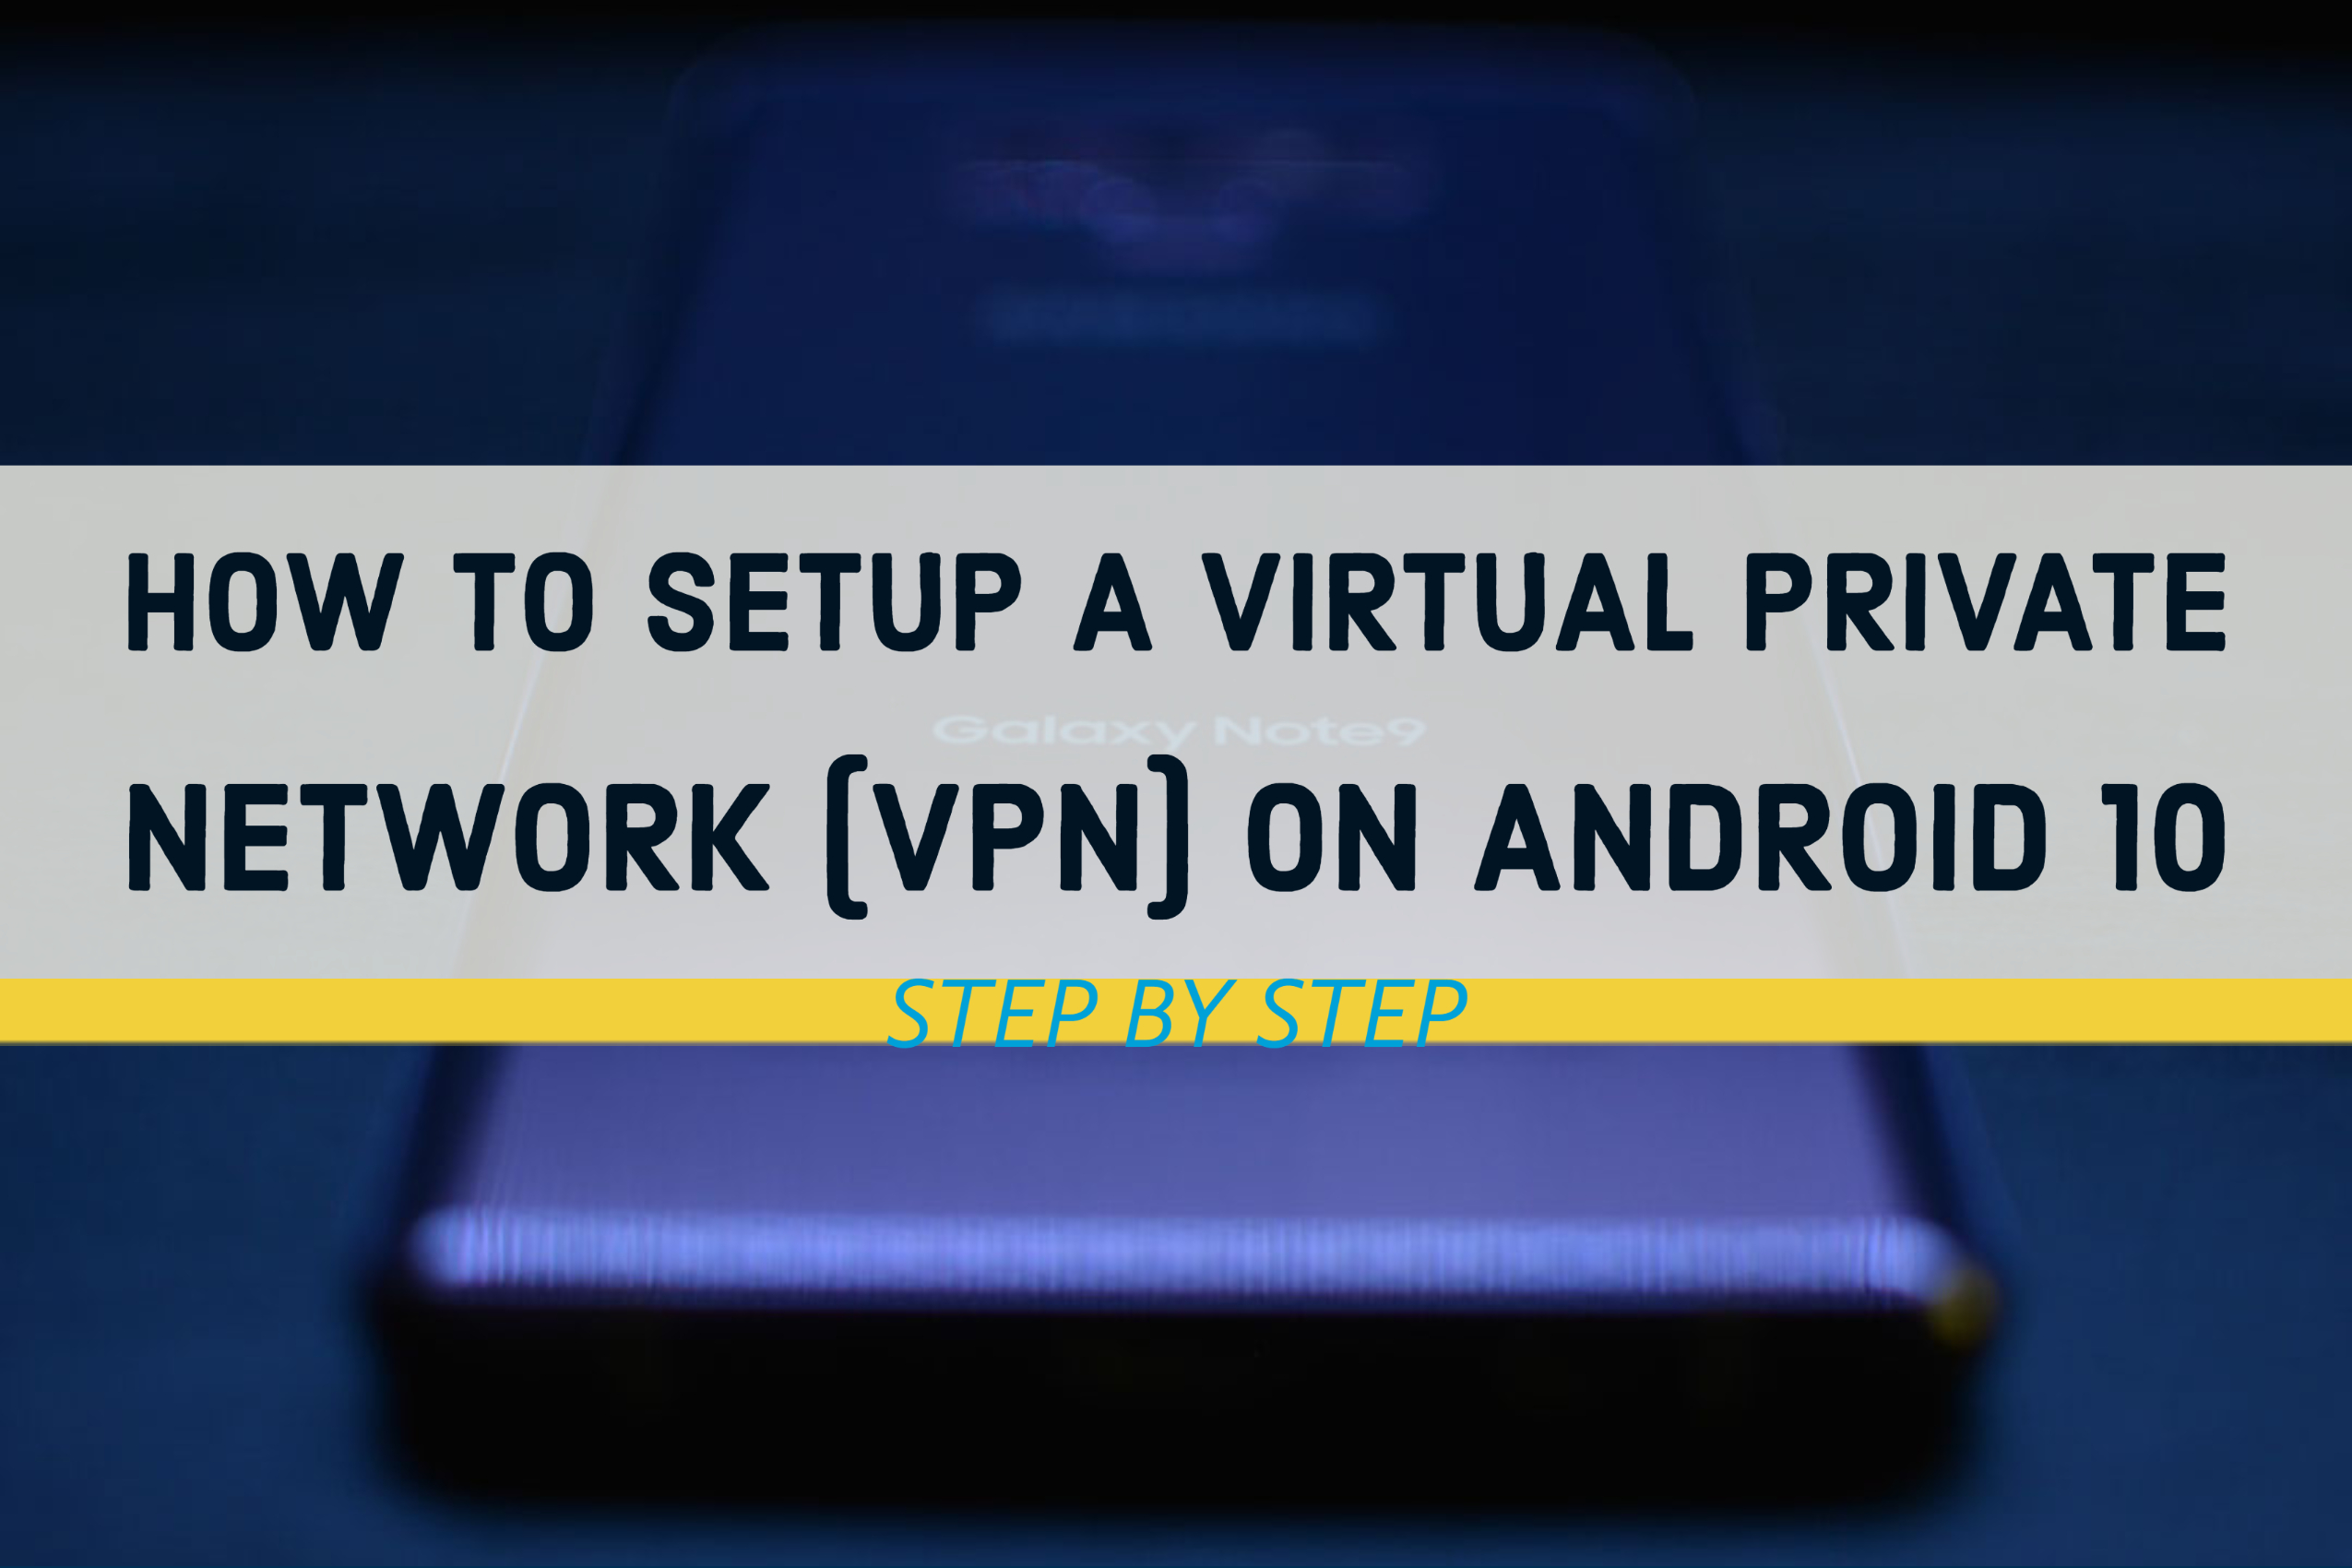 How to Setup a virtual private network (VPN) on Android 10